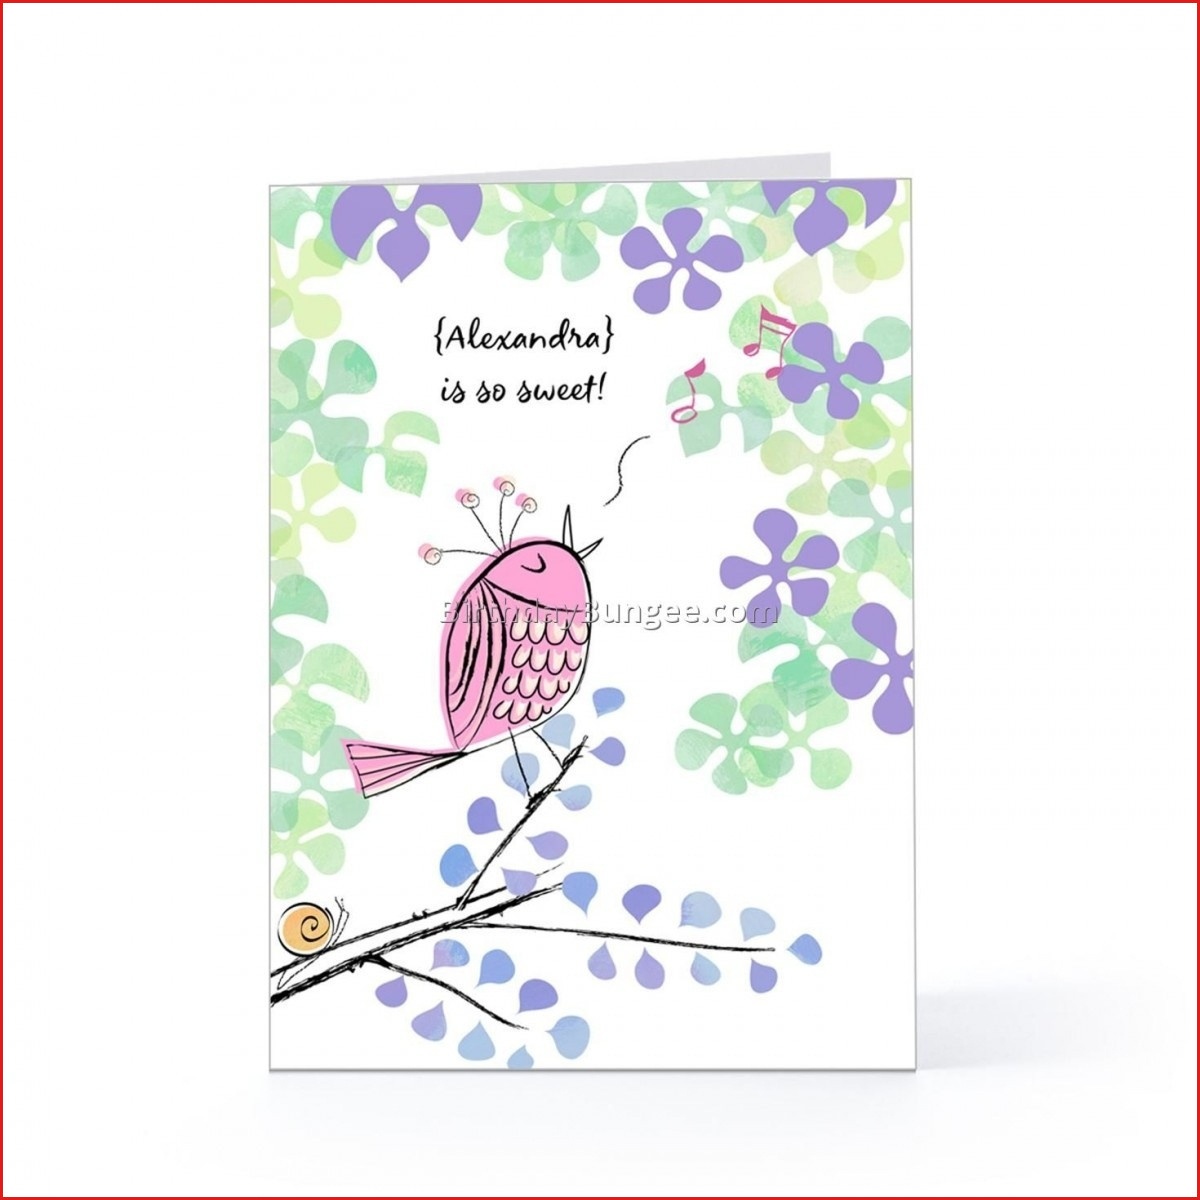 22-of-the-best-ideas-for-free-printable-hallmark-birthday-cards-home